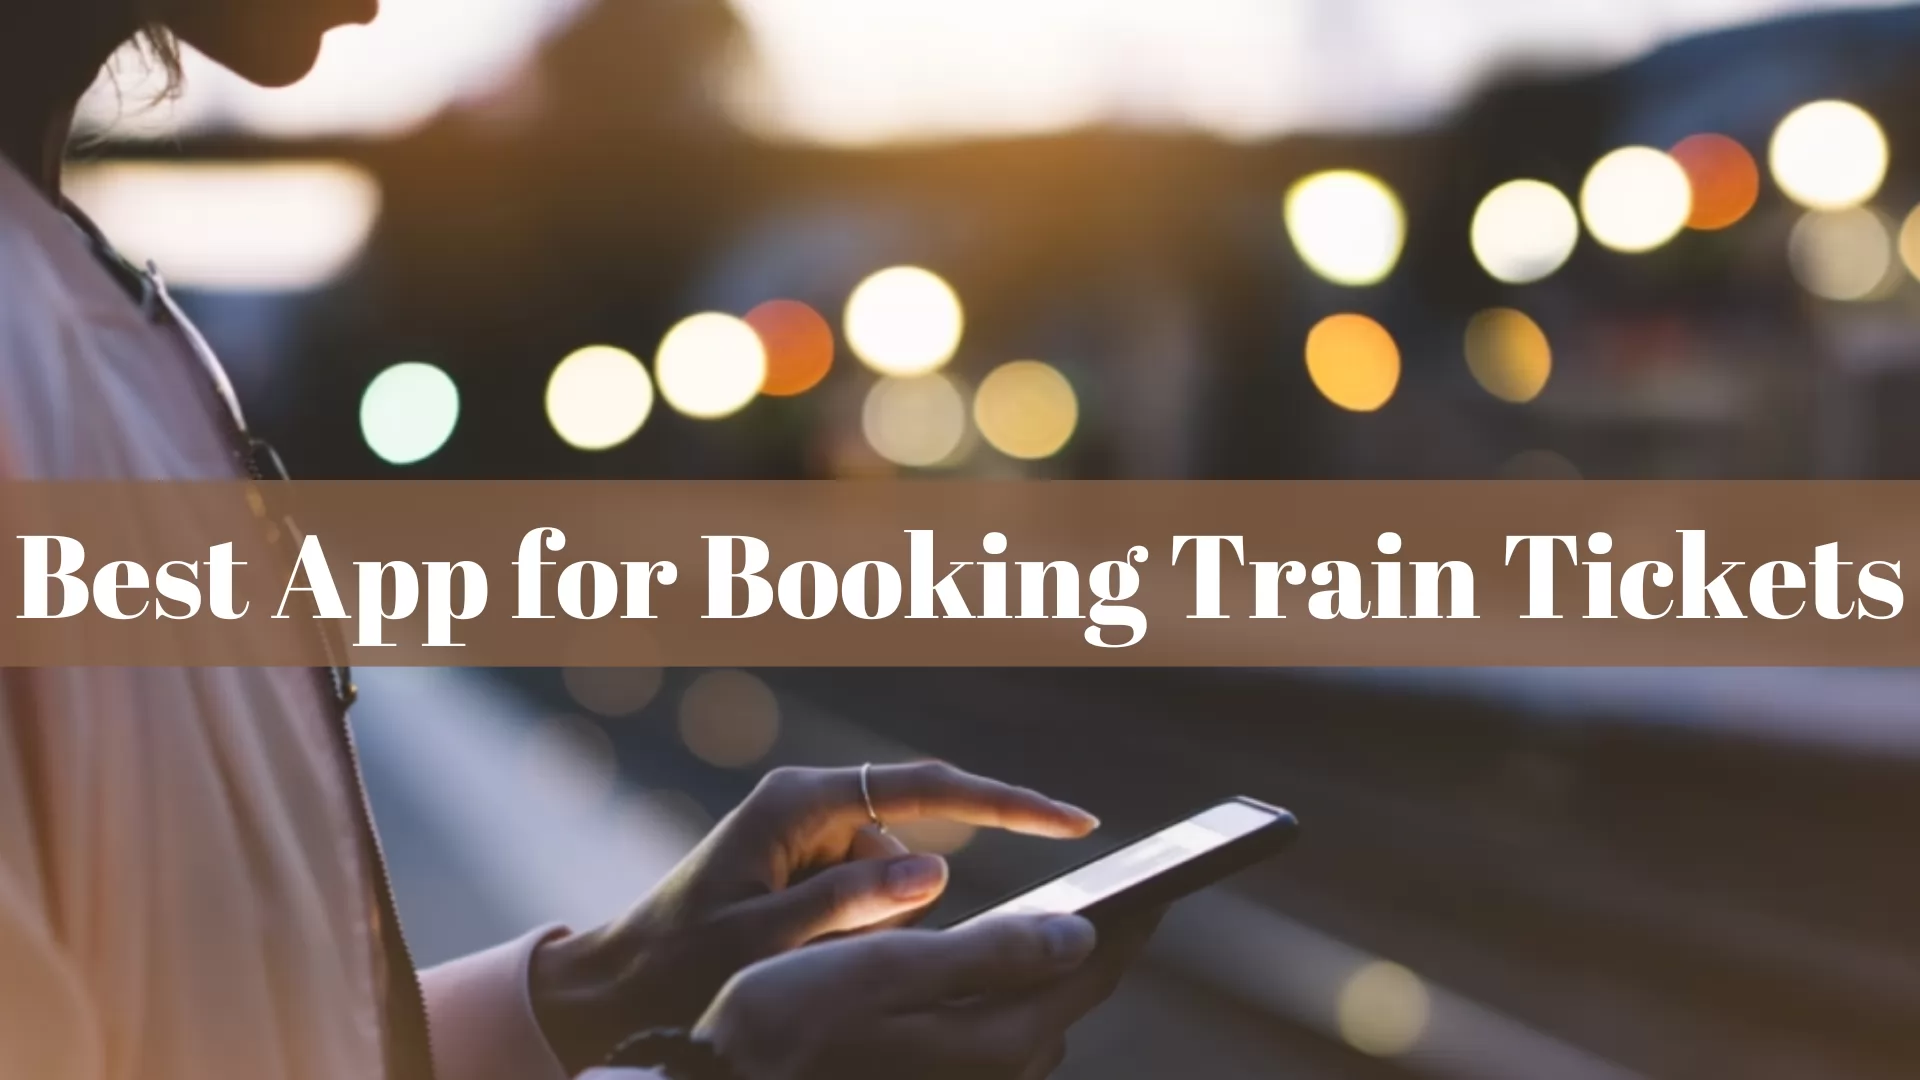 Best App for Booking Train Tickets